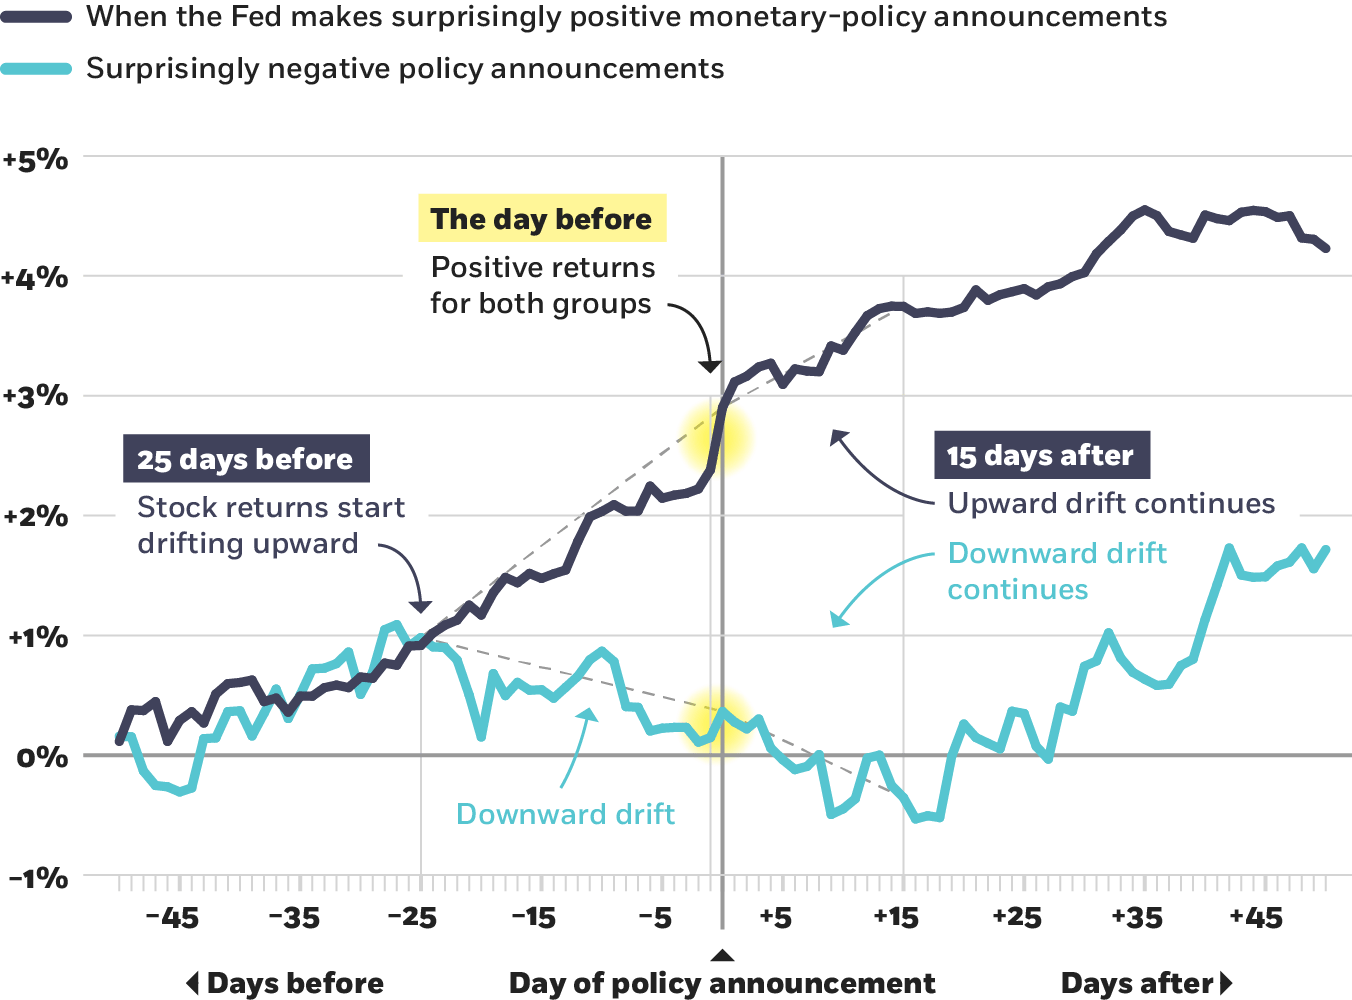 A line chart showing cumulative US stock returns, with percentage change on the y-axis, and a timeline on the x-axis surrounding the days that the Fed made a surprising policy announcement during the years of 1994 to 2009. One line starts at about zero percent fifty days before a surprisingly positive announcement and shows a steady rise through the day of the announcement and fifty days beyond reaching nearly five percent. A second line starts at about the same place, then begins a downward trend about twenty-five days before a surprisingly negative policy announcement, dropping below zero percent, and then starting to rise fifteen days later, eventually reaching nearly two percent.